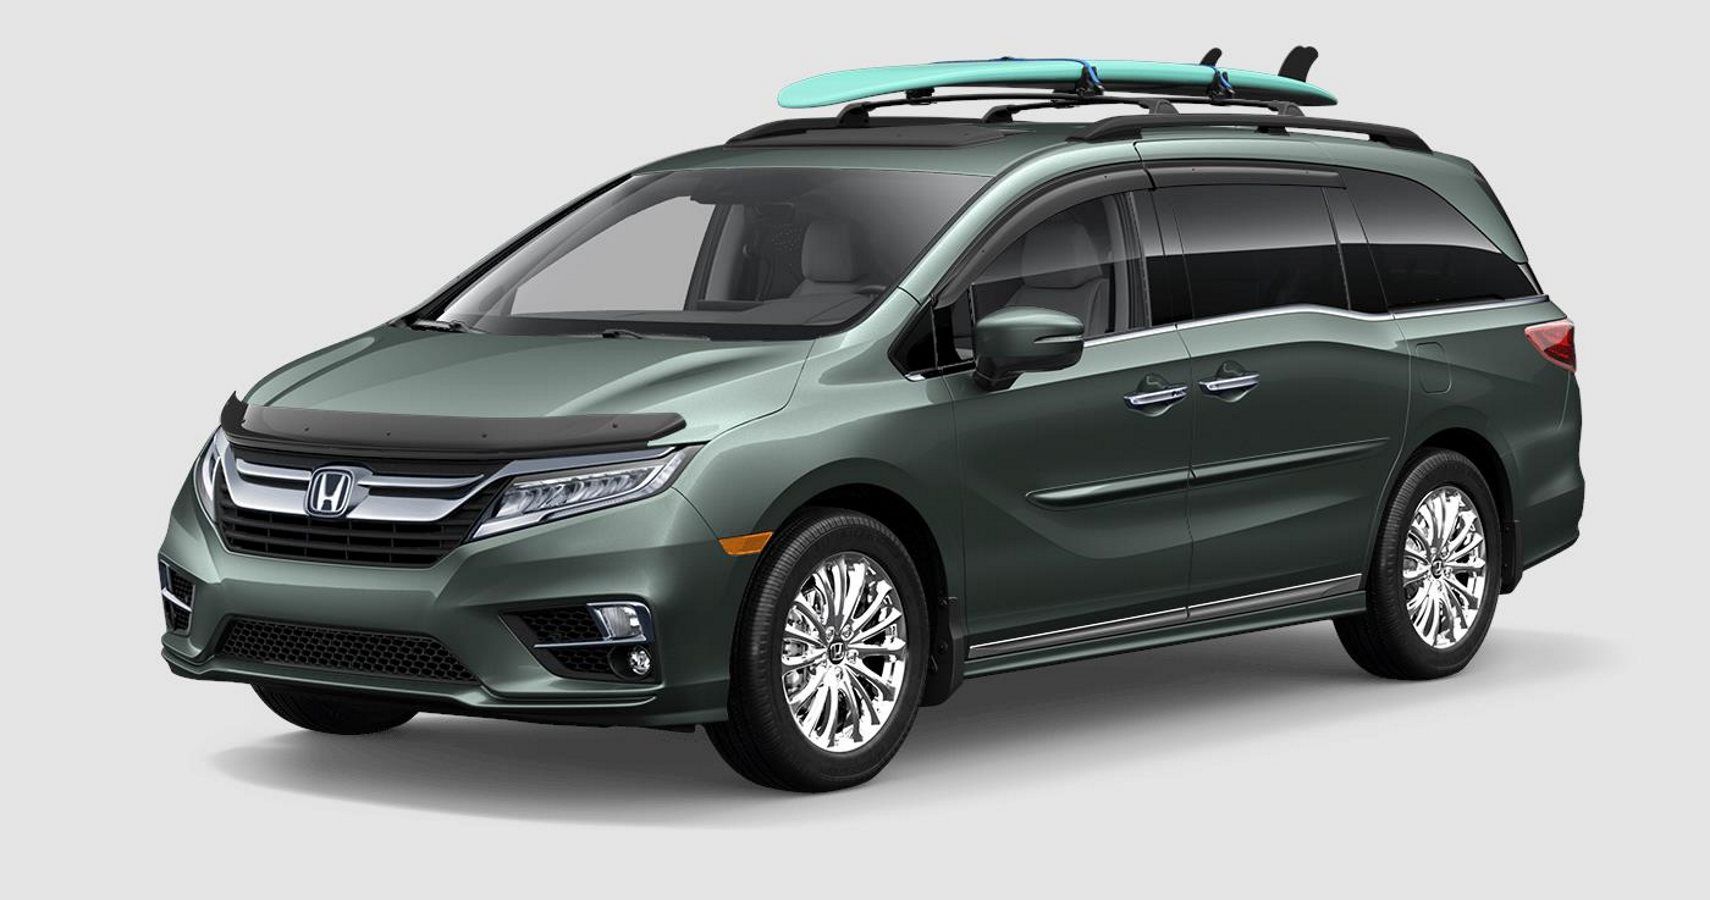 Honda Odyssey Elite Gives Drivers A Surf Rack & Tent For Price Of A Porsche